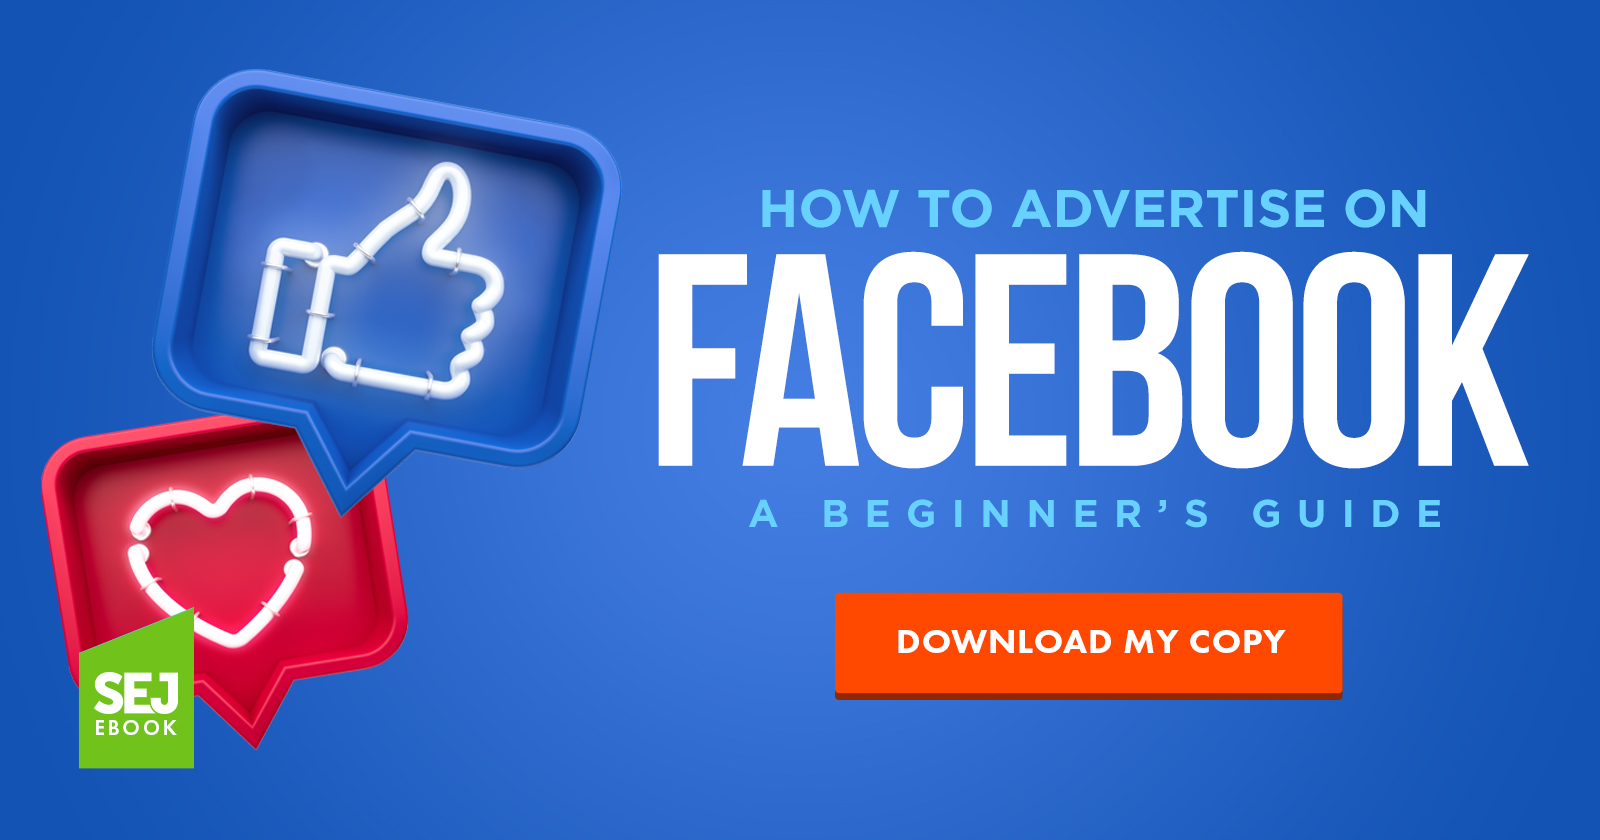 How To Advertise On Facebook A Beginner S Guide